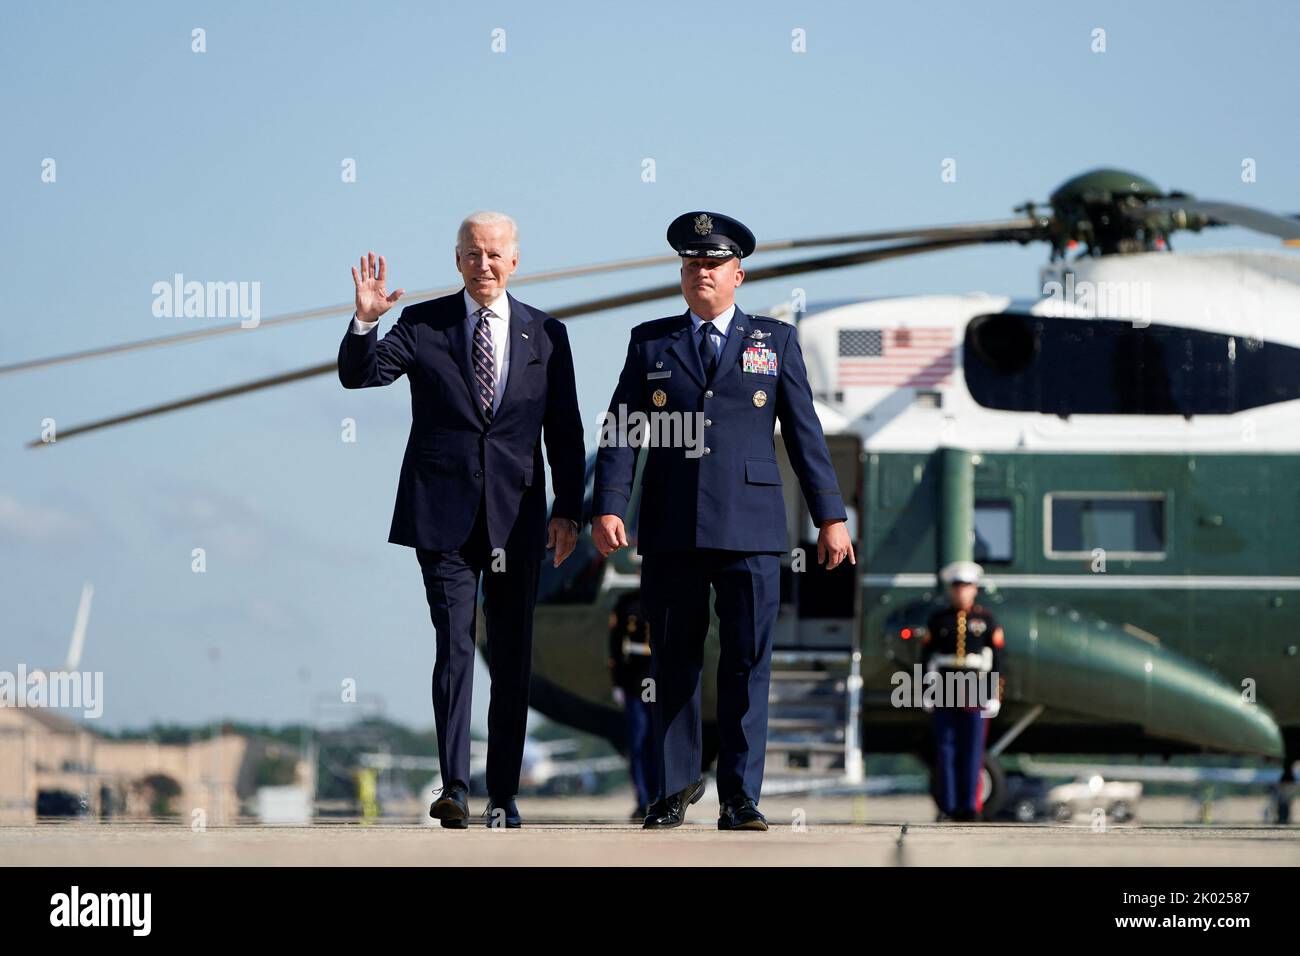 U.S. President Joe Biden waves as he walks to board Air Force One to travel to Columbus, Ohio, from Joint Base Andrews in Maryland, U.S. September 9, 2022. REUTERS/Joshua Roberts Stock Photo